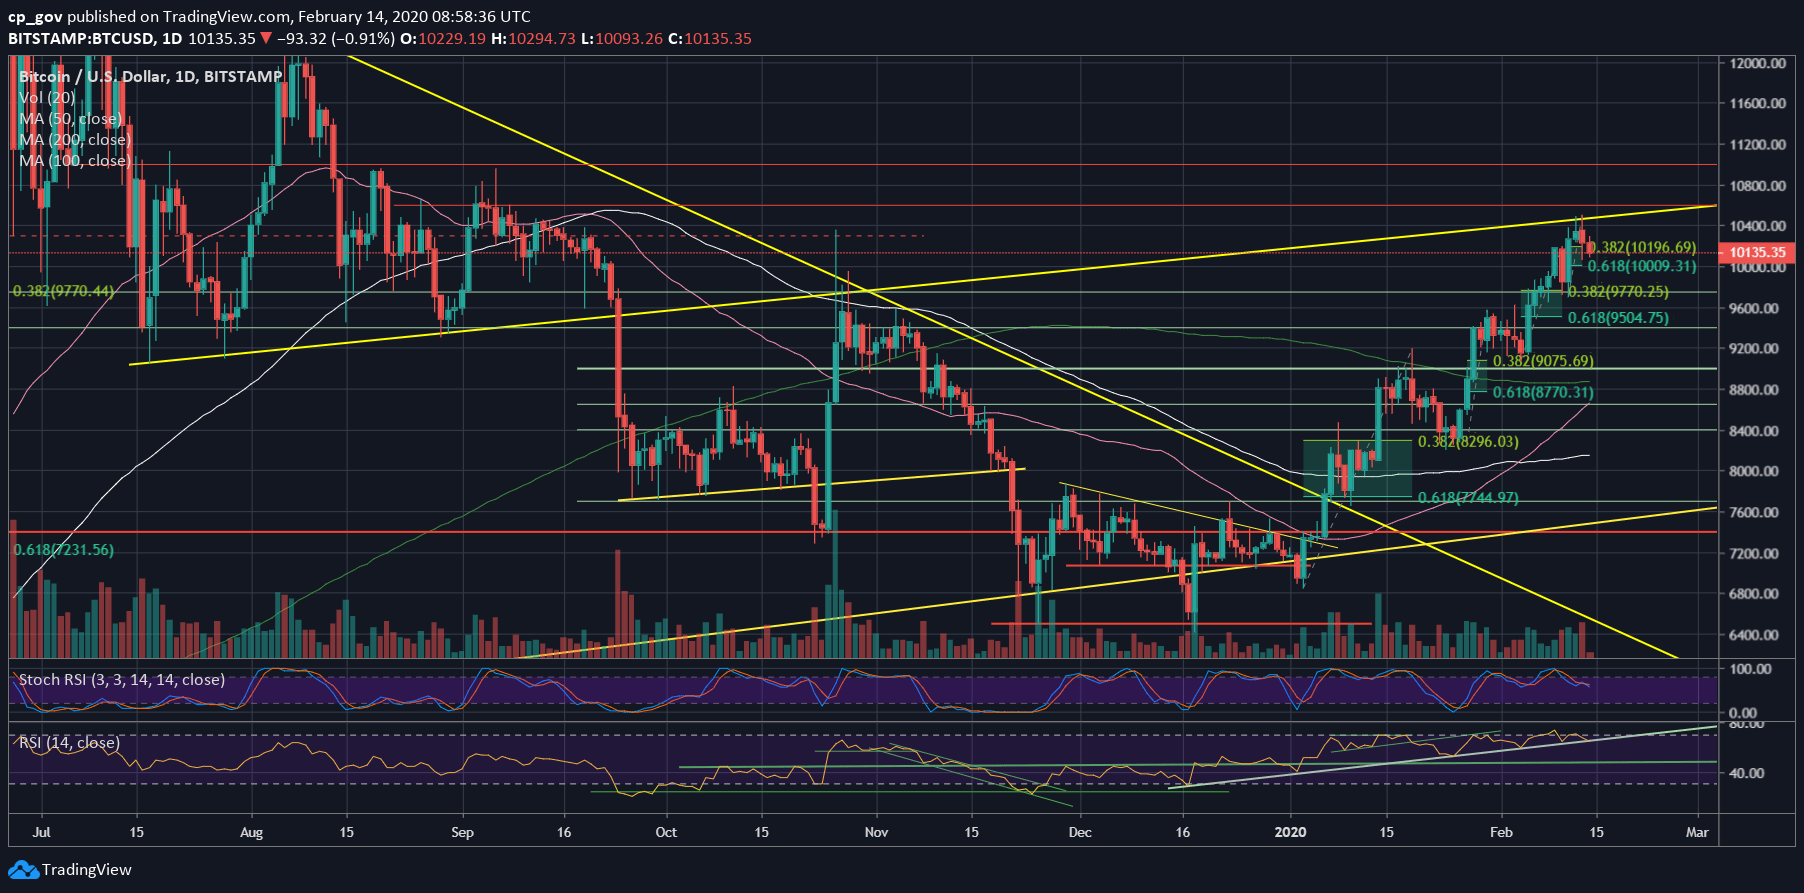 Bitcoin Failed To Break The Crucial 2019 Resistance Line: How Low Can It Drop From Here? BTC Price Analysis & Overview